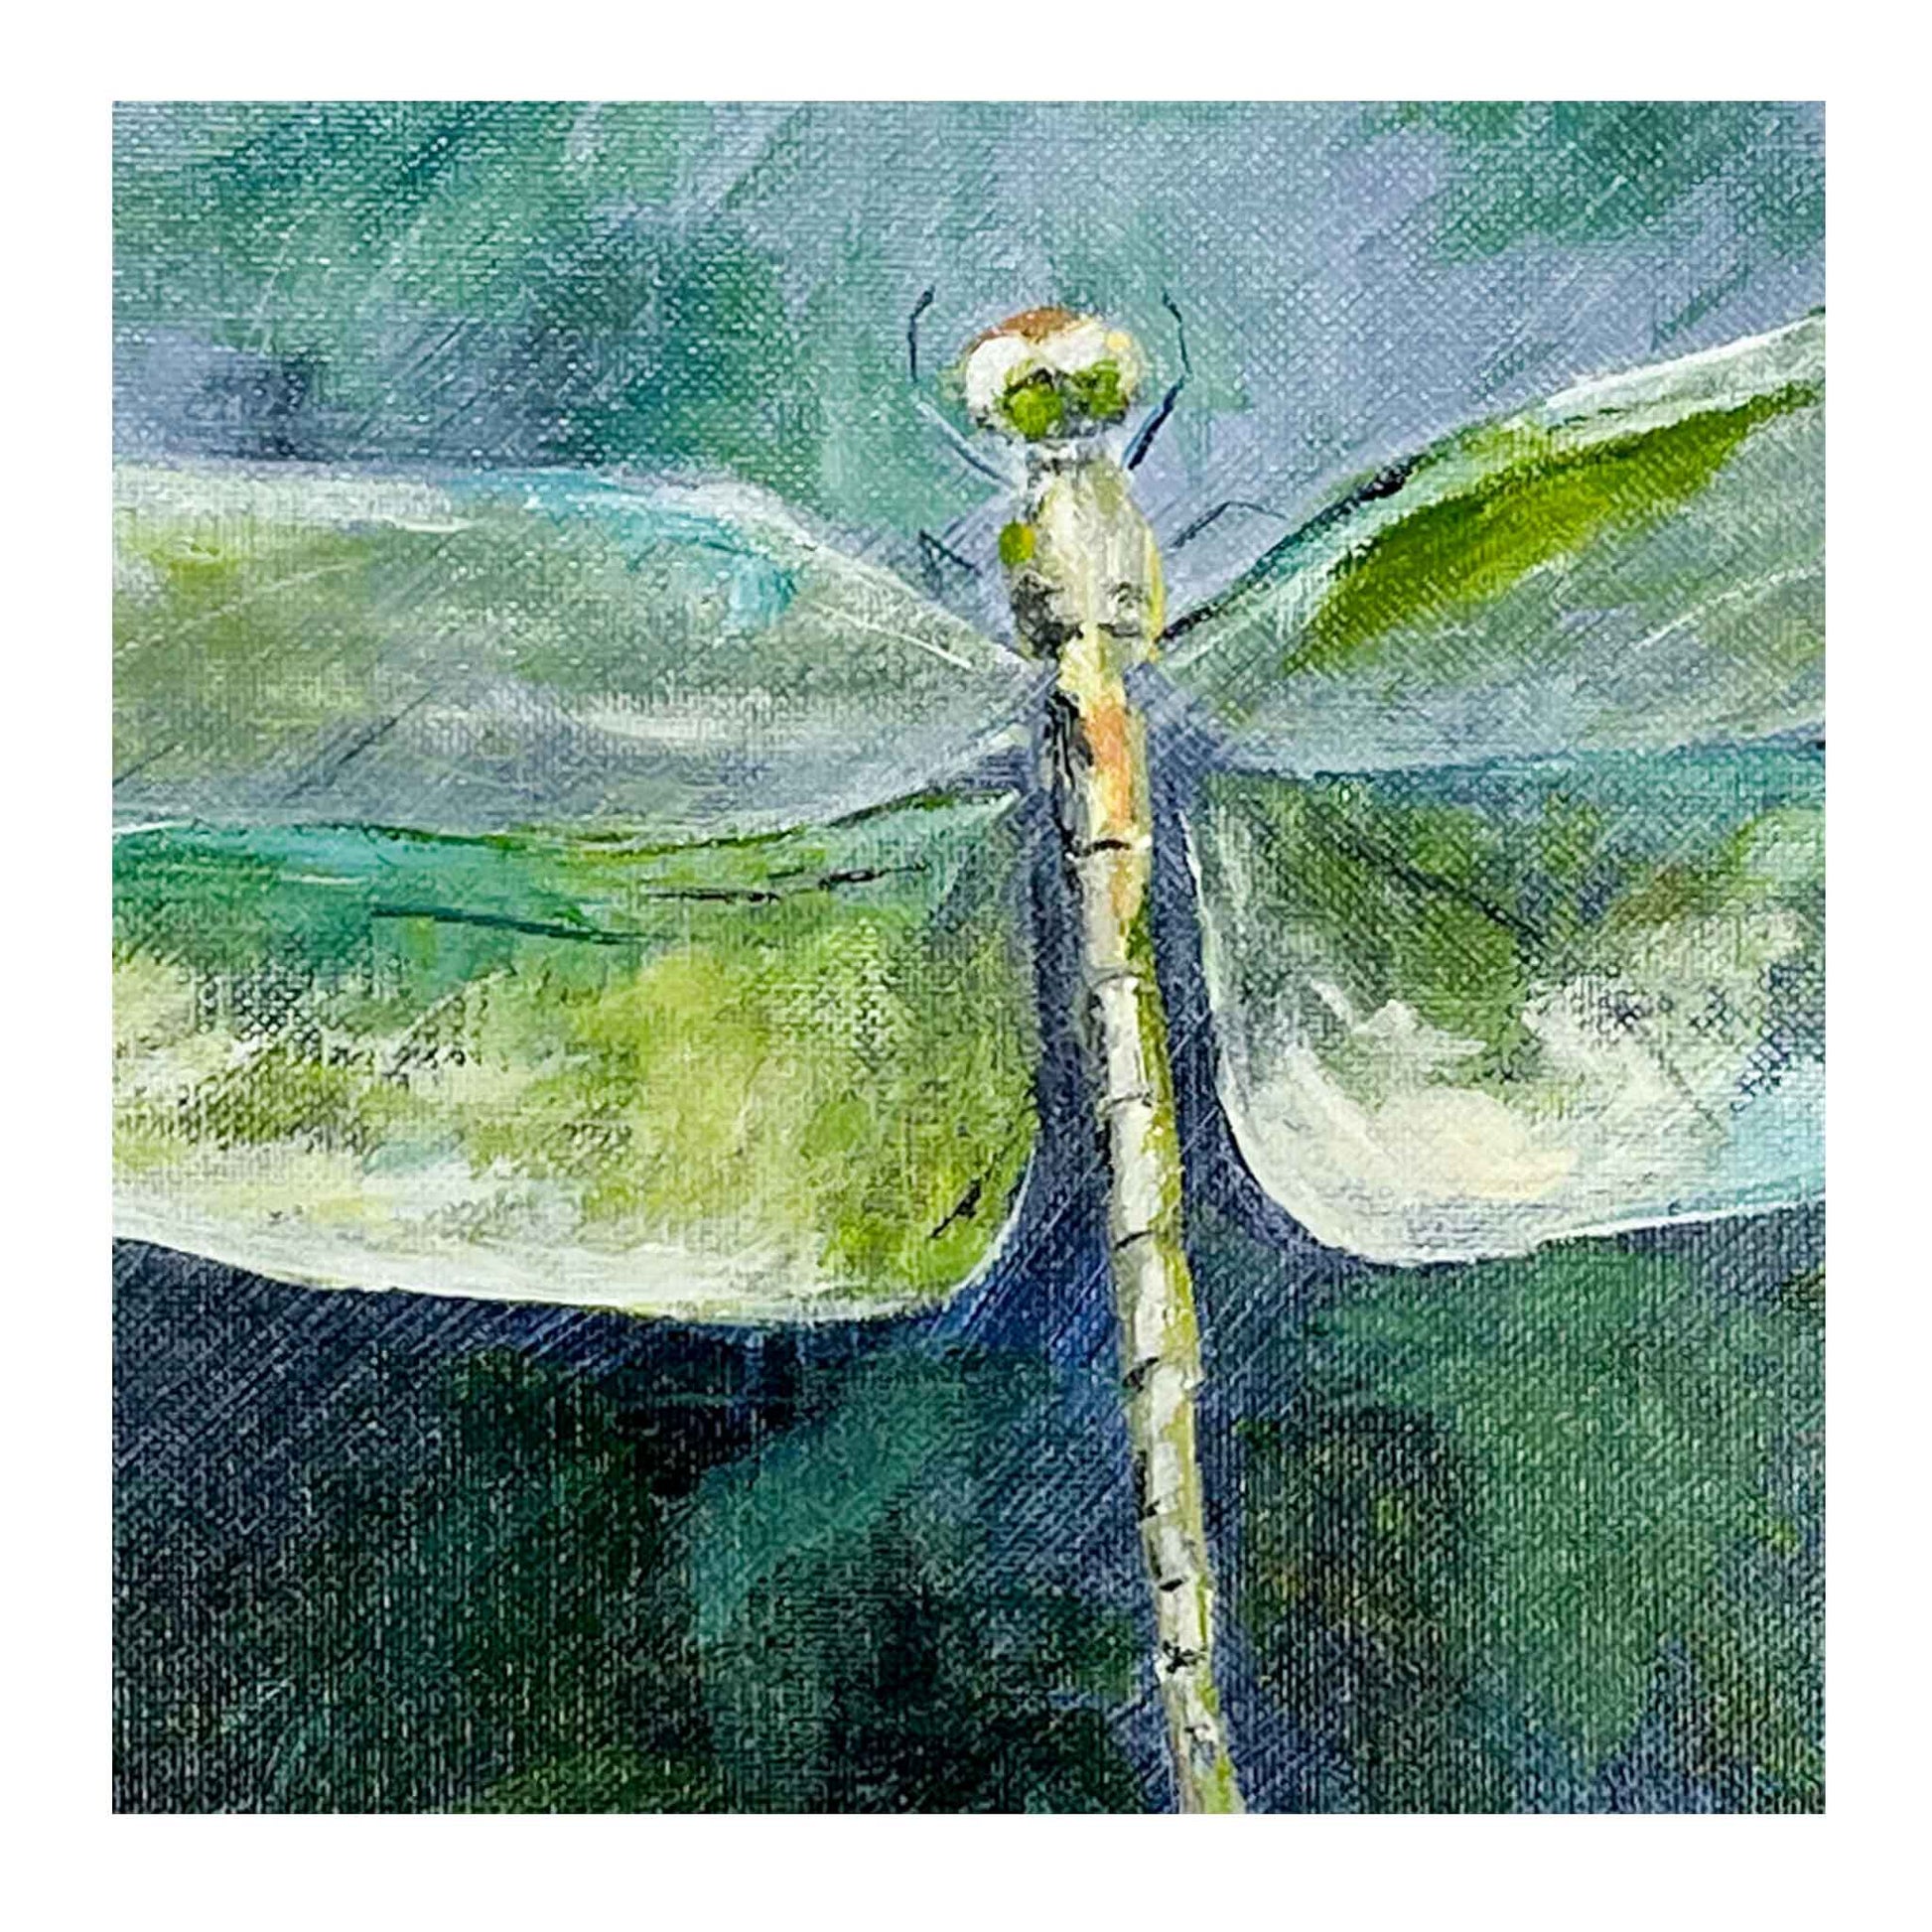 RO New Beginnings - Expressive Dragonfly Original Painting. Original painting done with a palette knife and brushes. Green and cream colored dragonfly on a muted green and blue background. Measures 19" x 11". Framed with a black wooden frame and ready to hang.